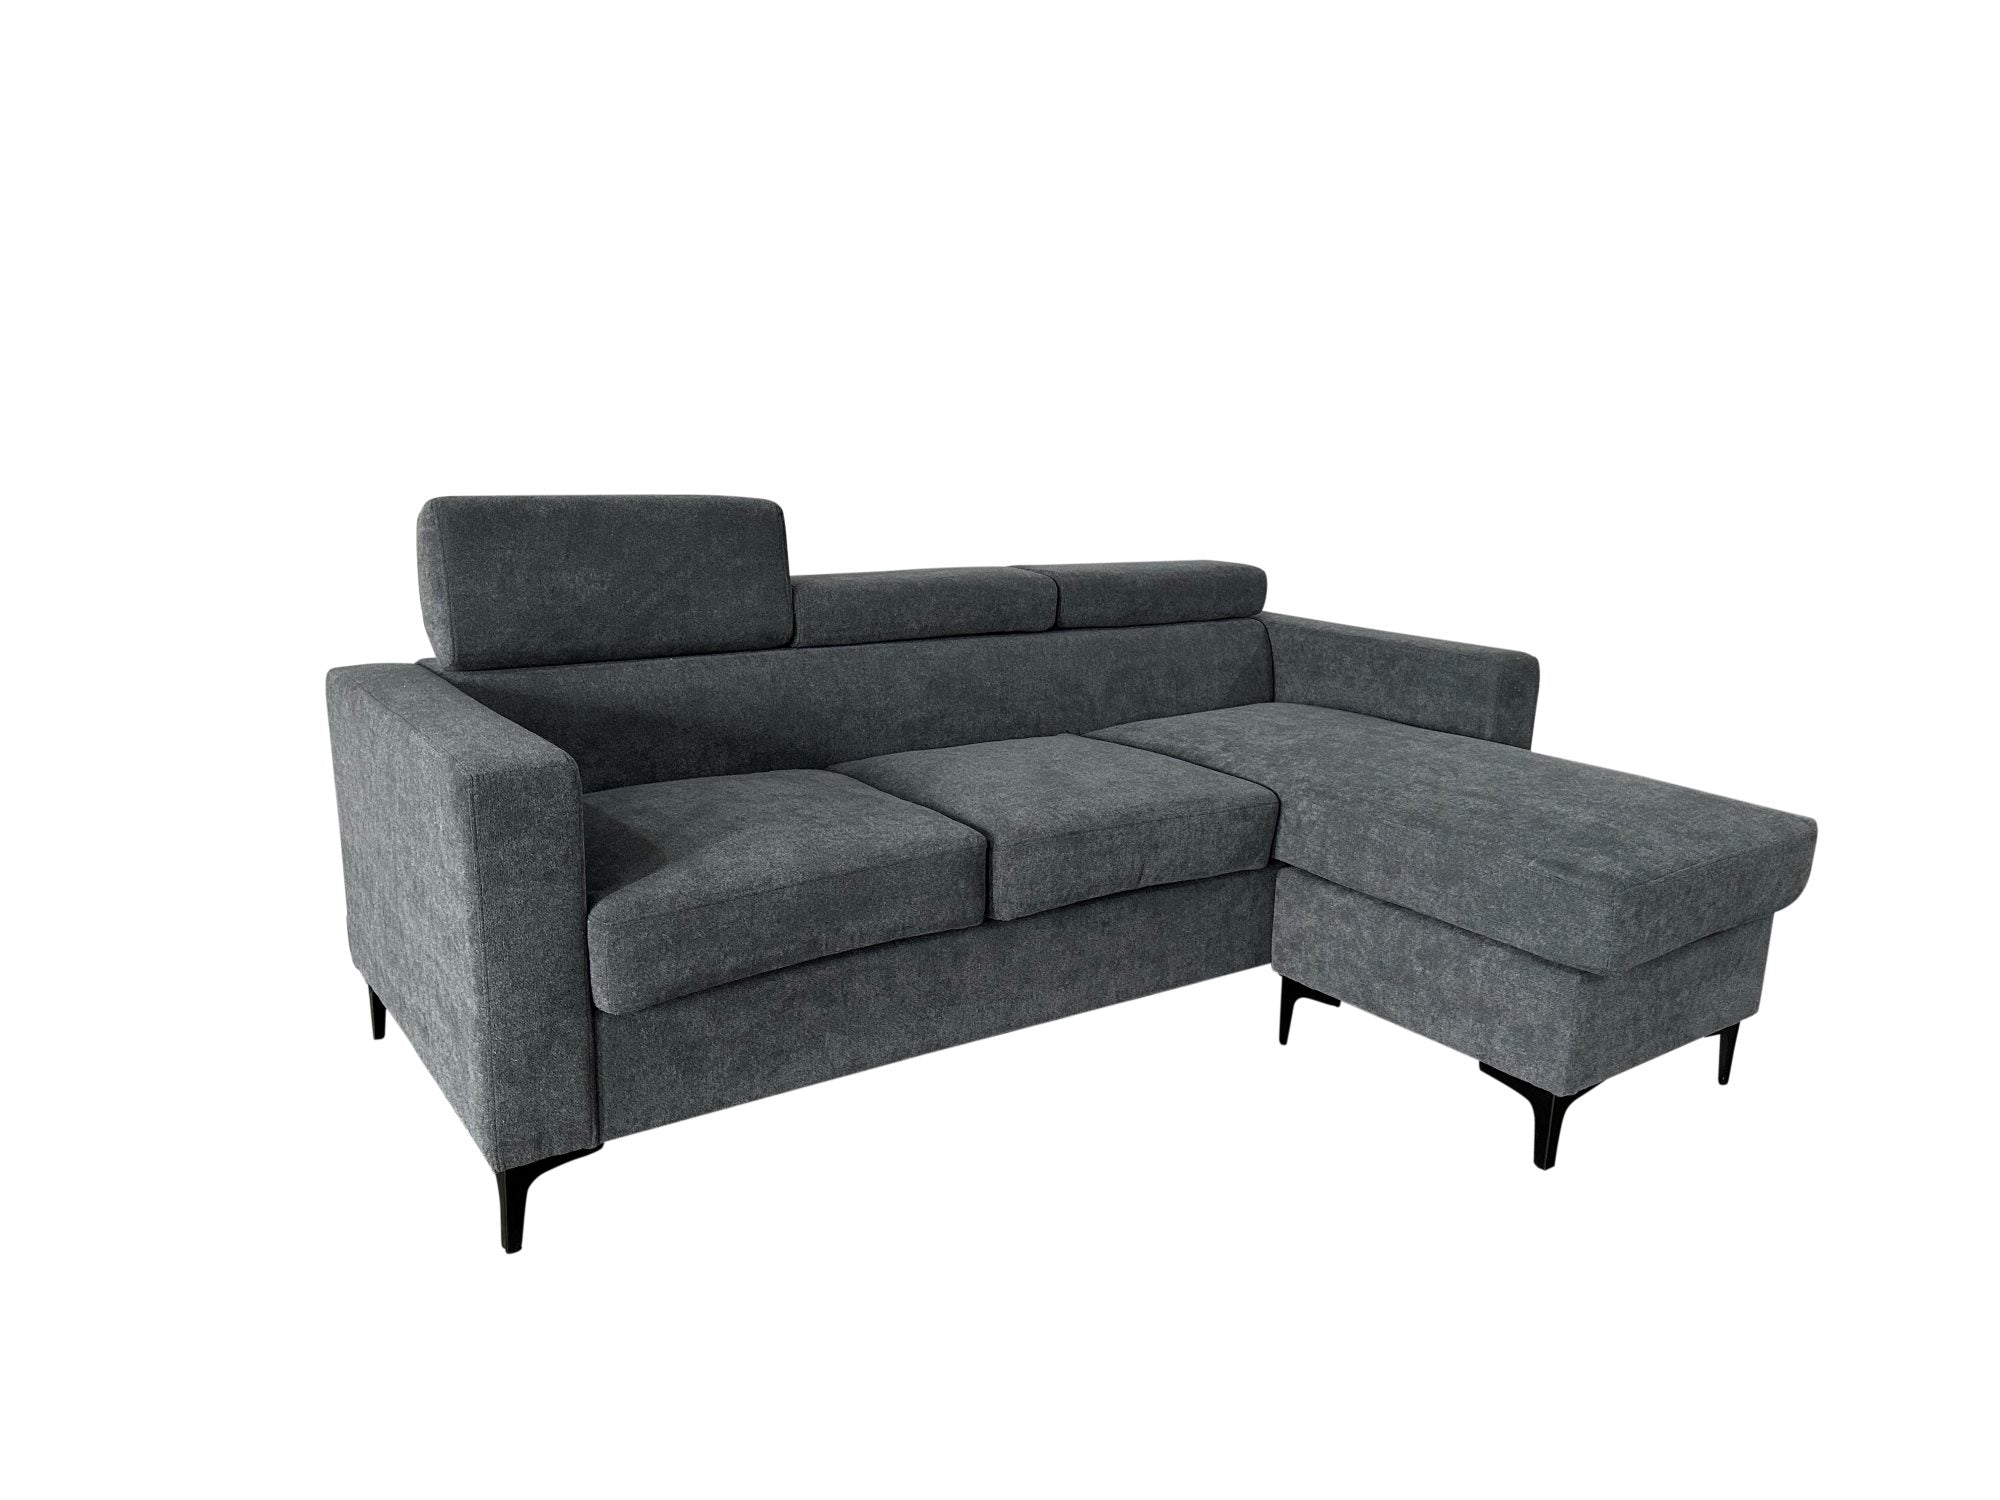 Shelly Reversible Sectional Sofa - Charcoal Fabric